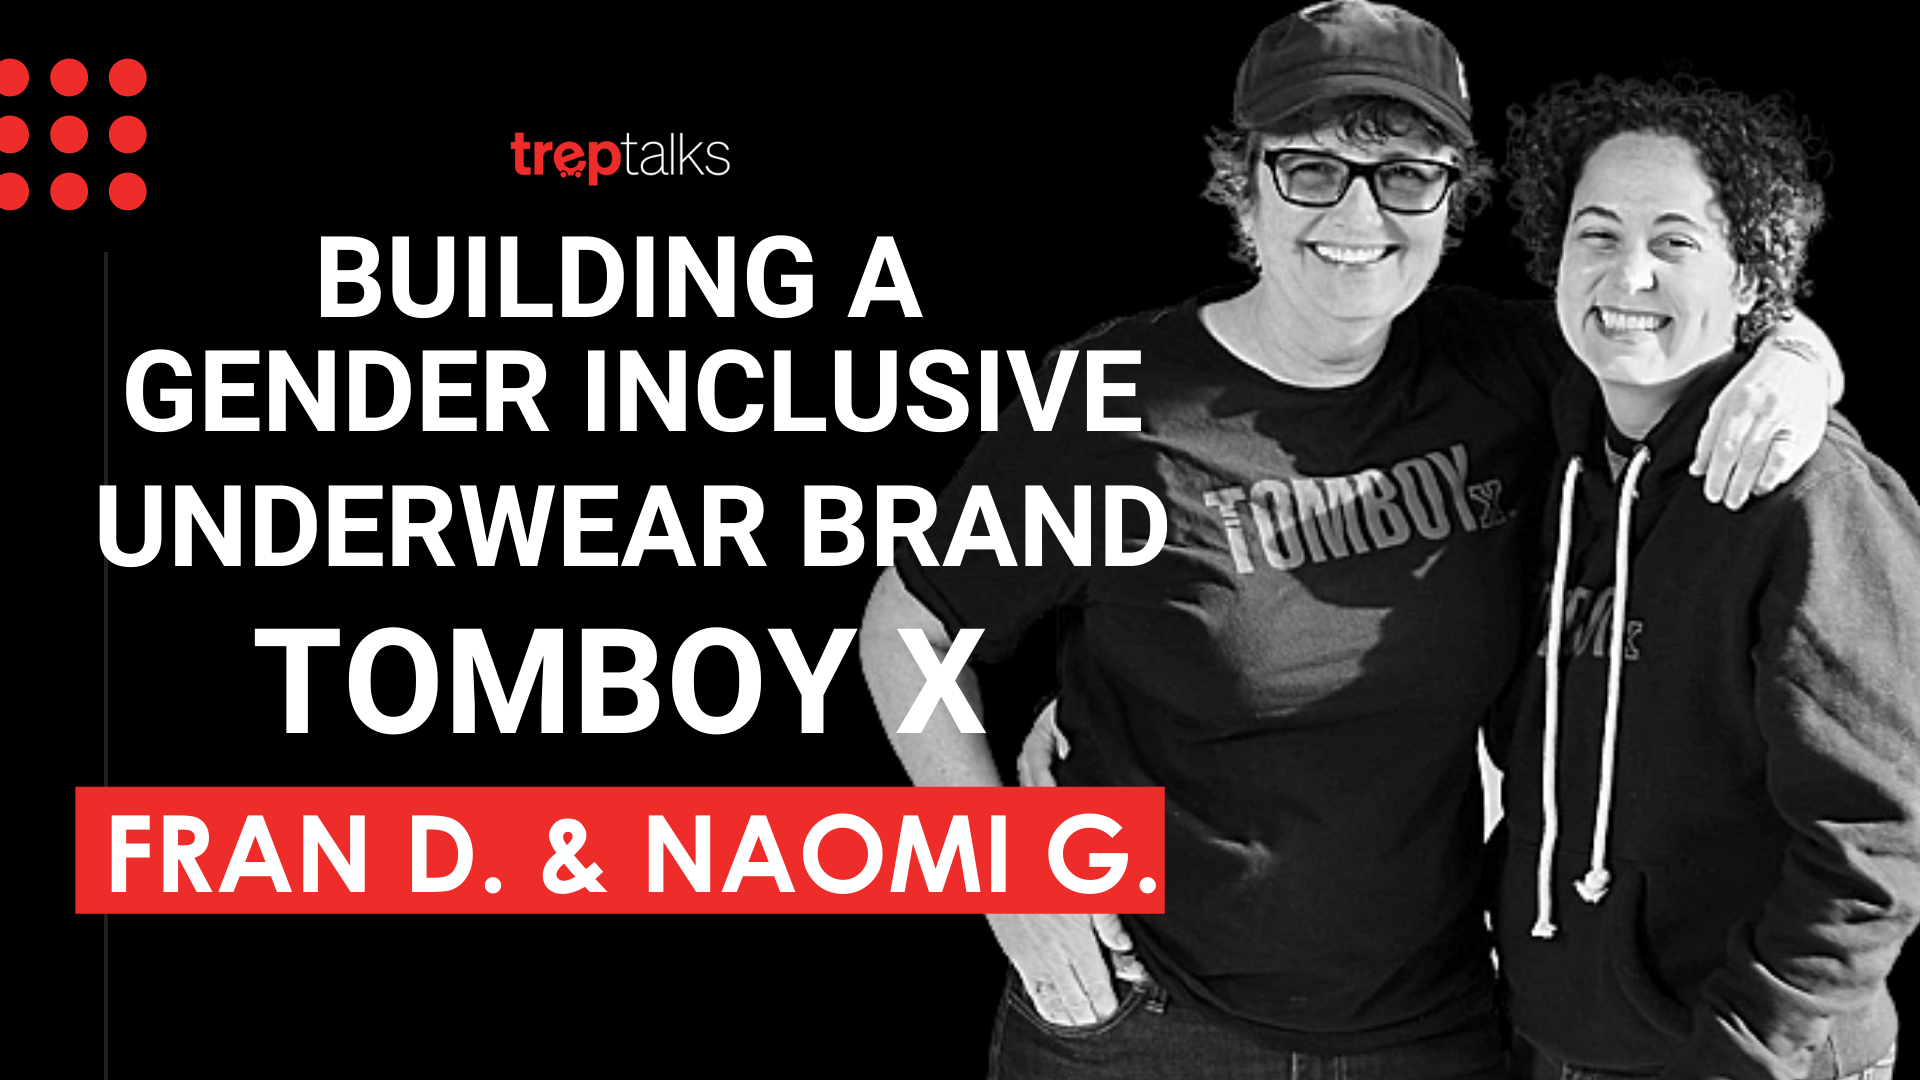 Fran Dunaway and Naomi Gonzalez, Co-founders of TomboyX